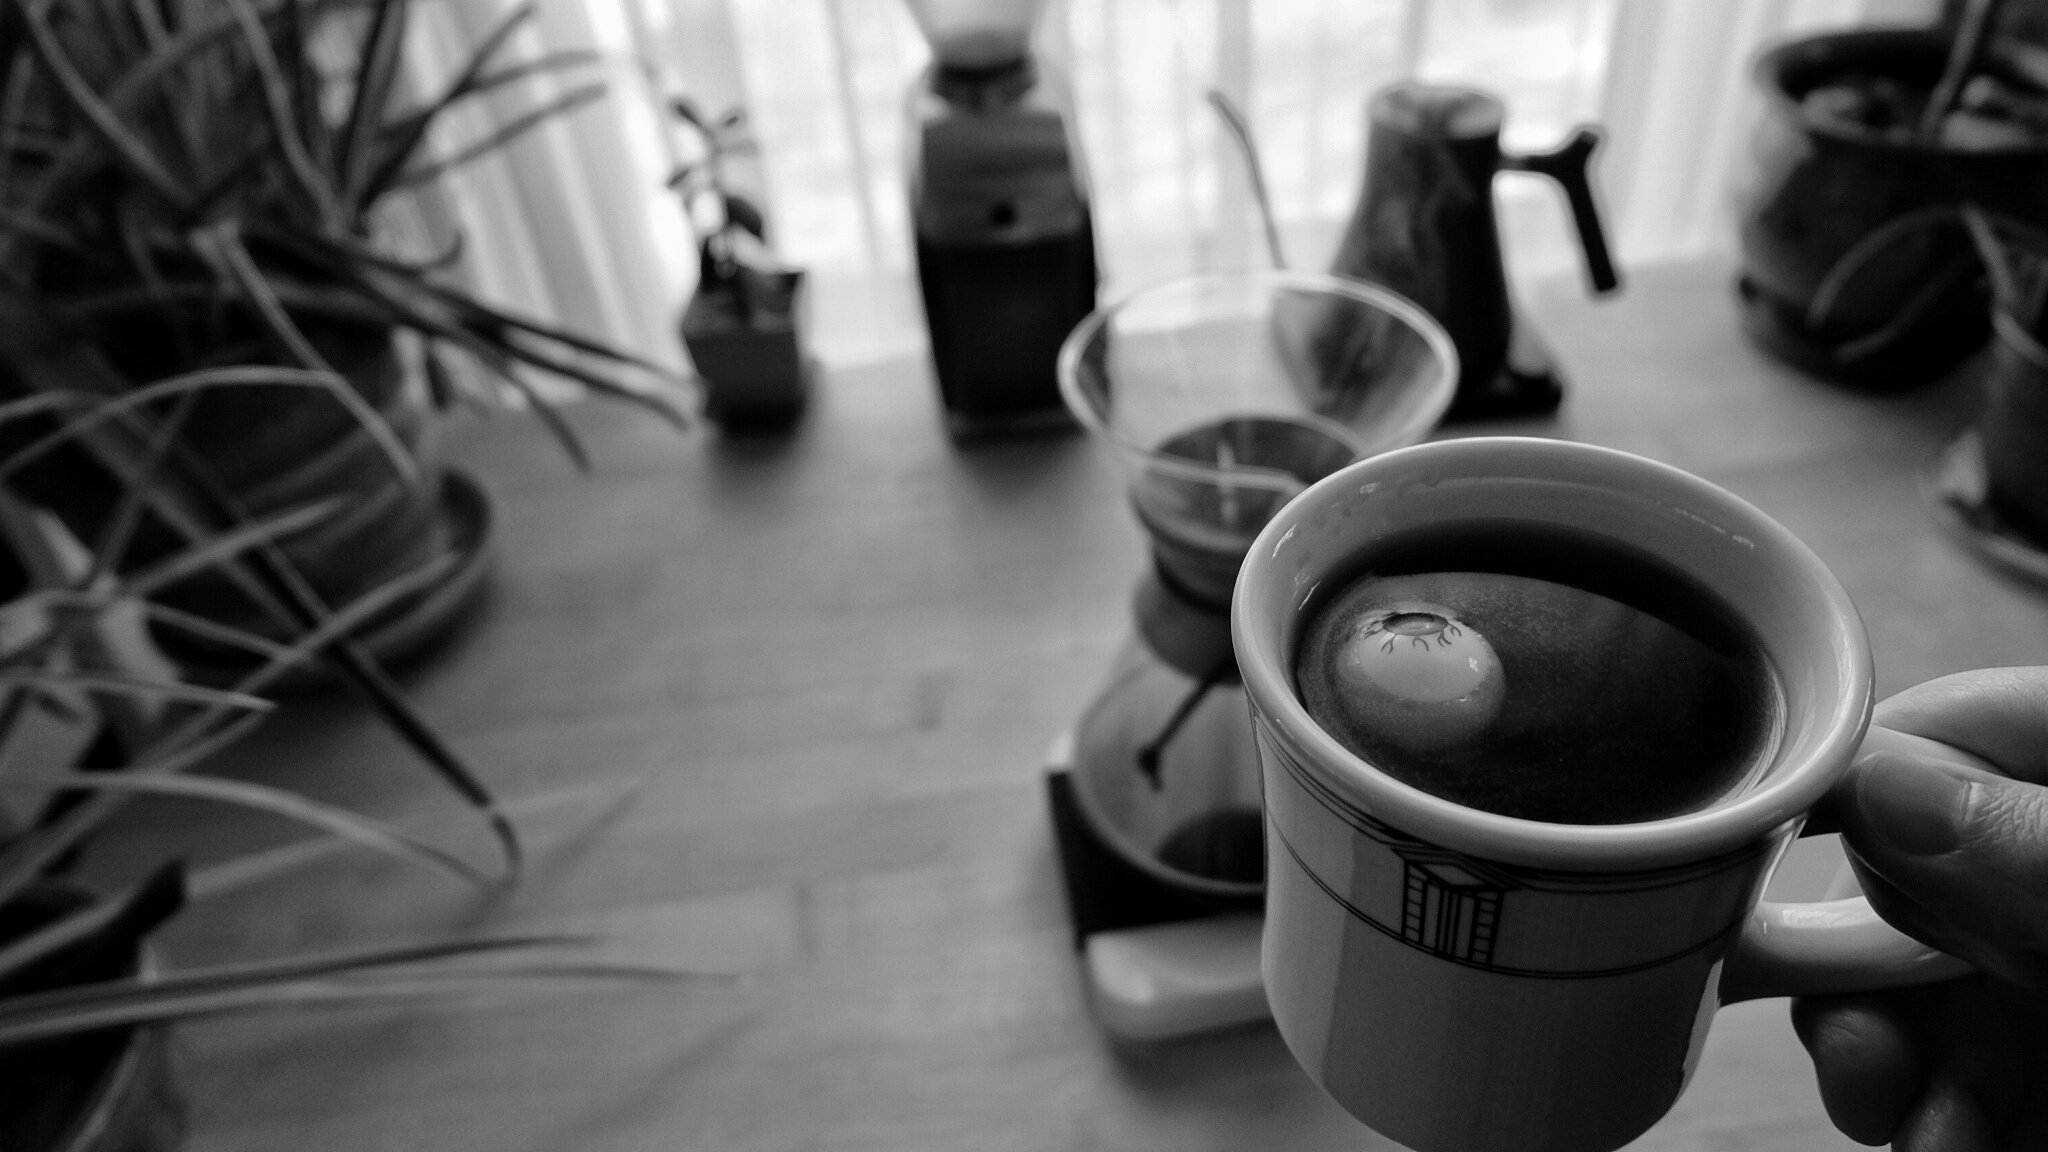 A fake eyeball floats in a cup of coffee held above a brewing station